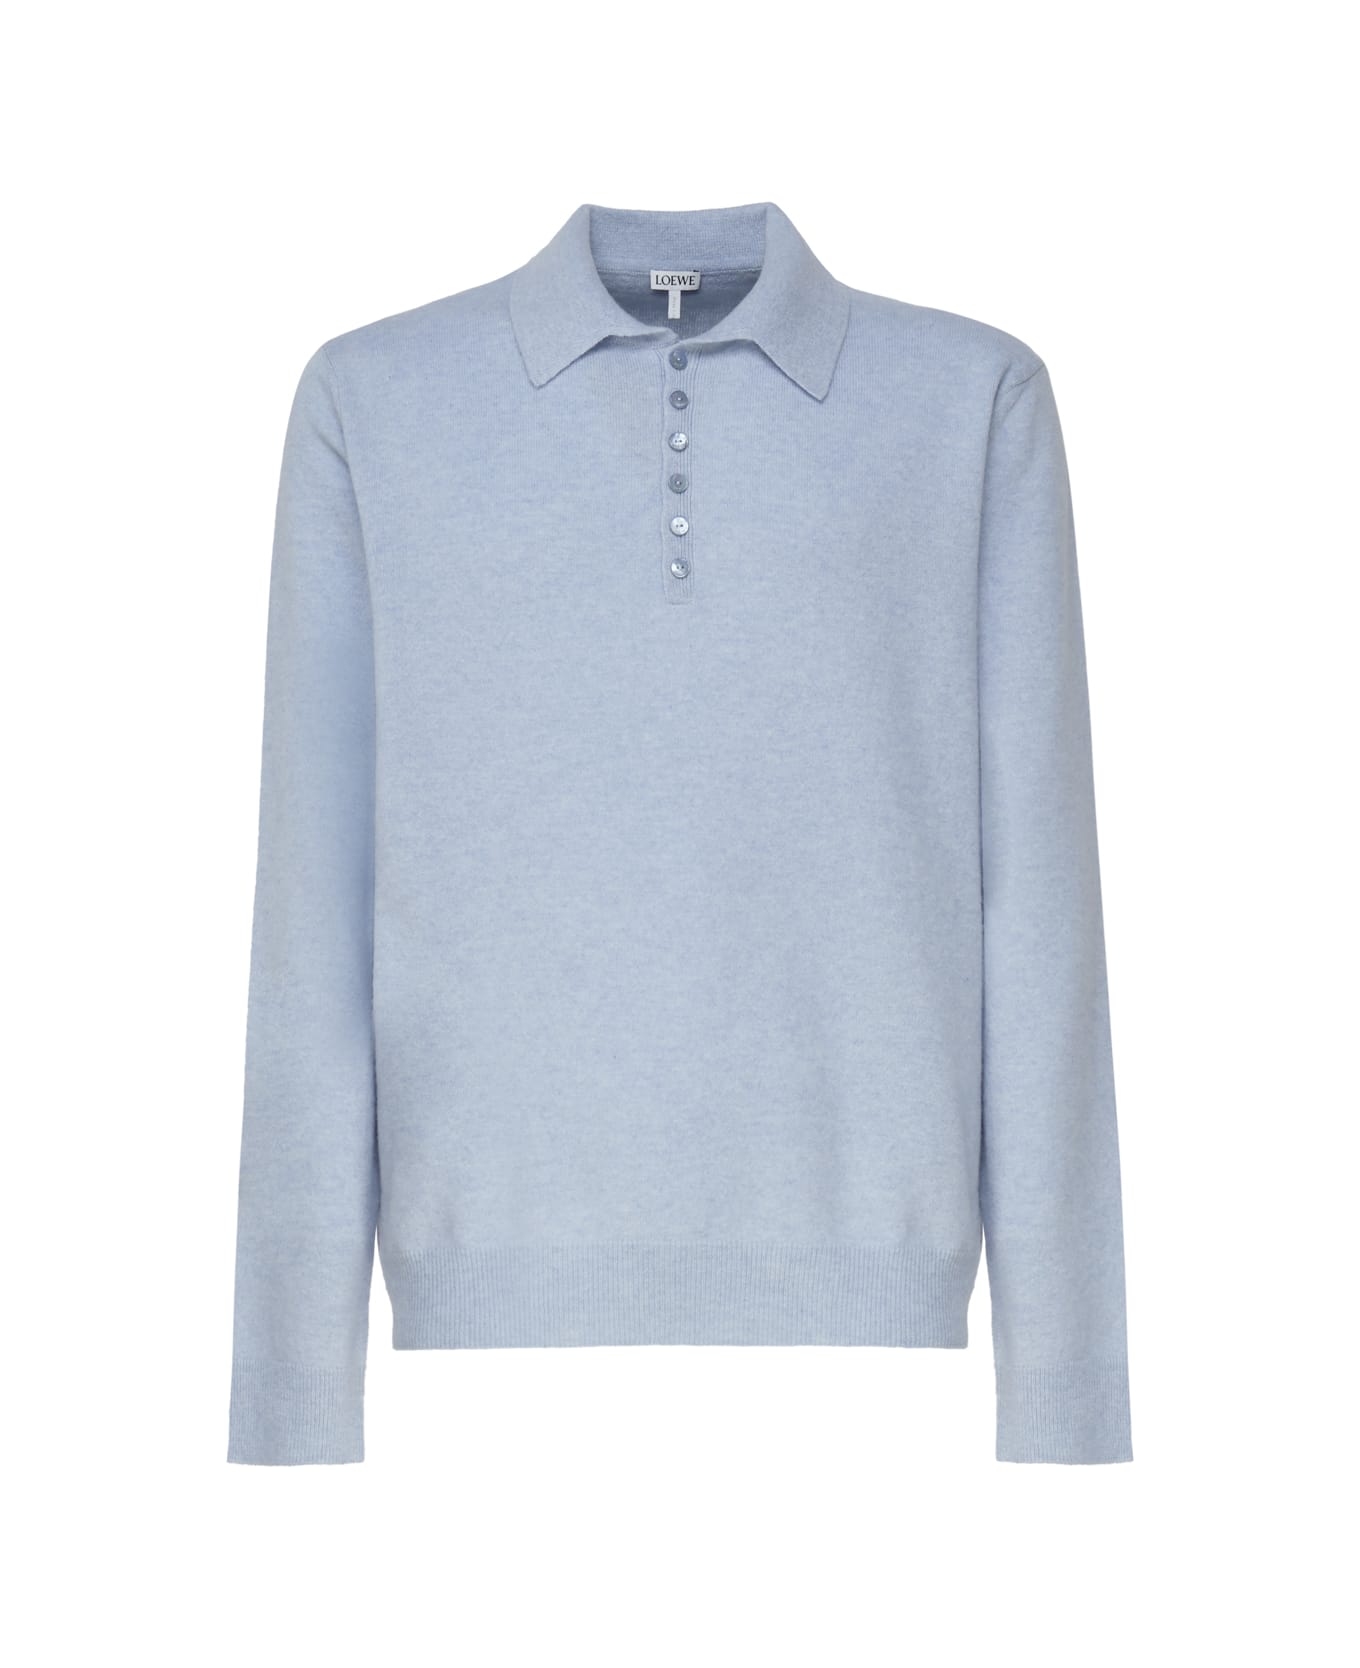 Loewe Polo Sweater In Soft Cashmere - Light blue ポロシャツ